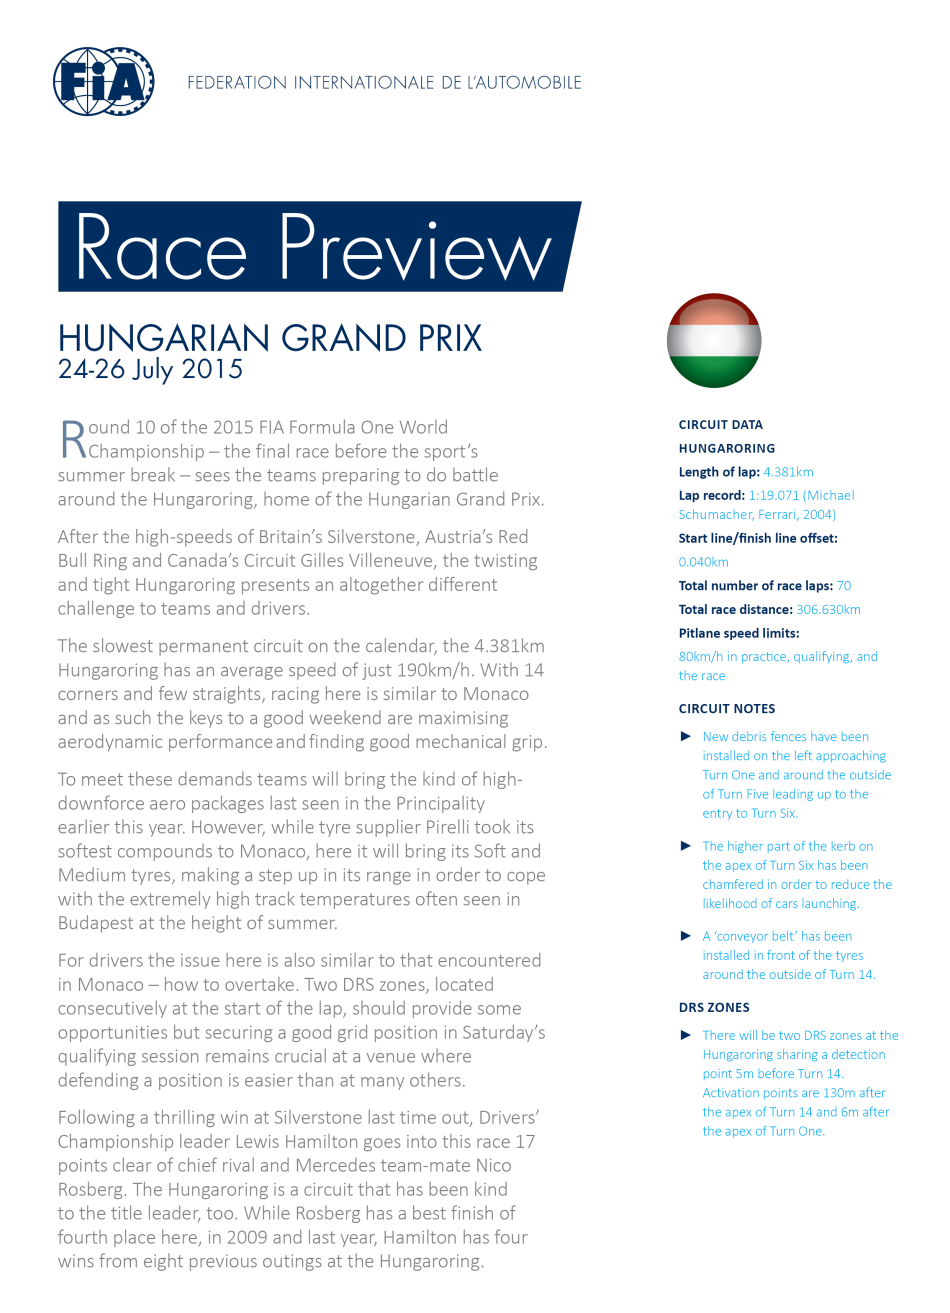 2015 Hungary grand prix race preview  